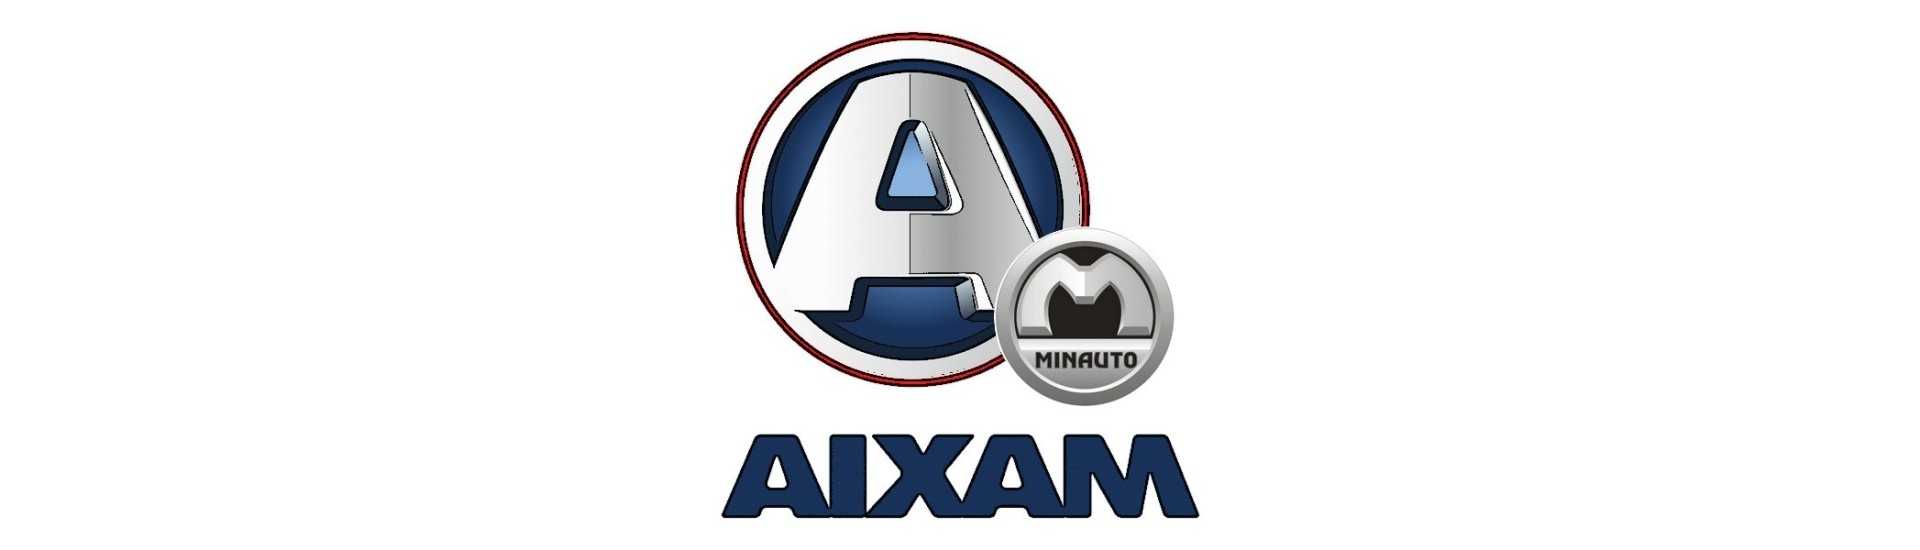 Steering wheel at the best car price without a permit Aixam Minauto